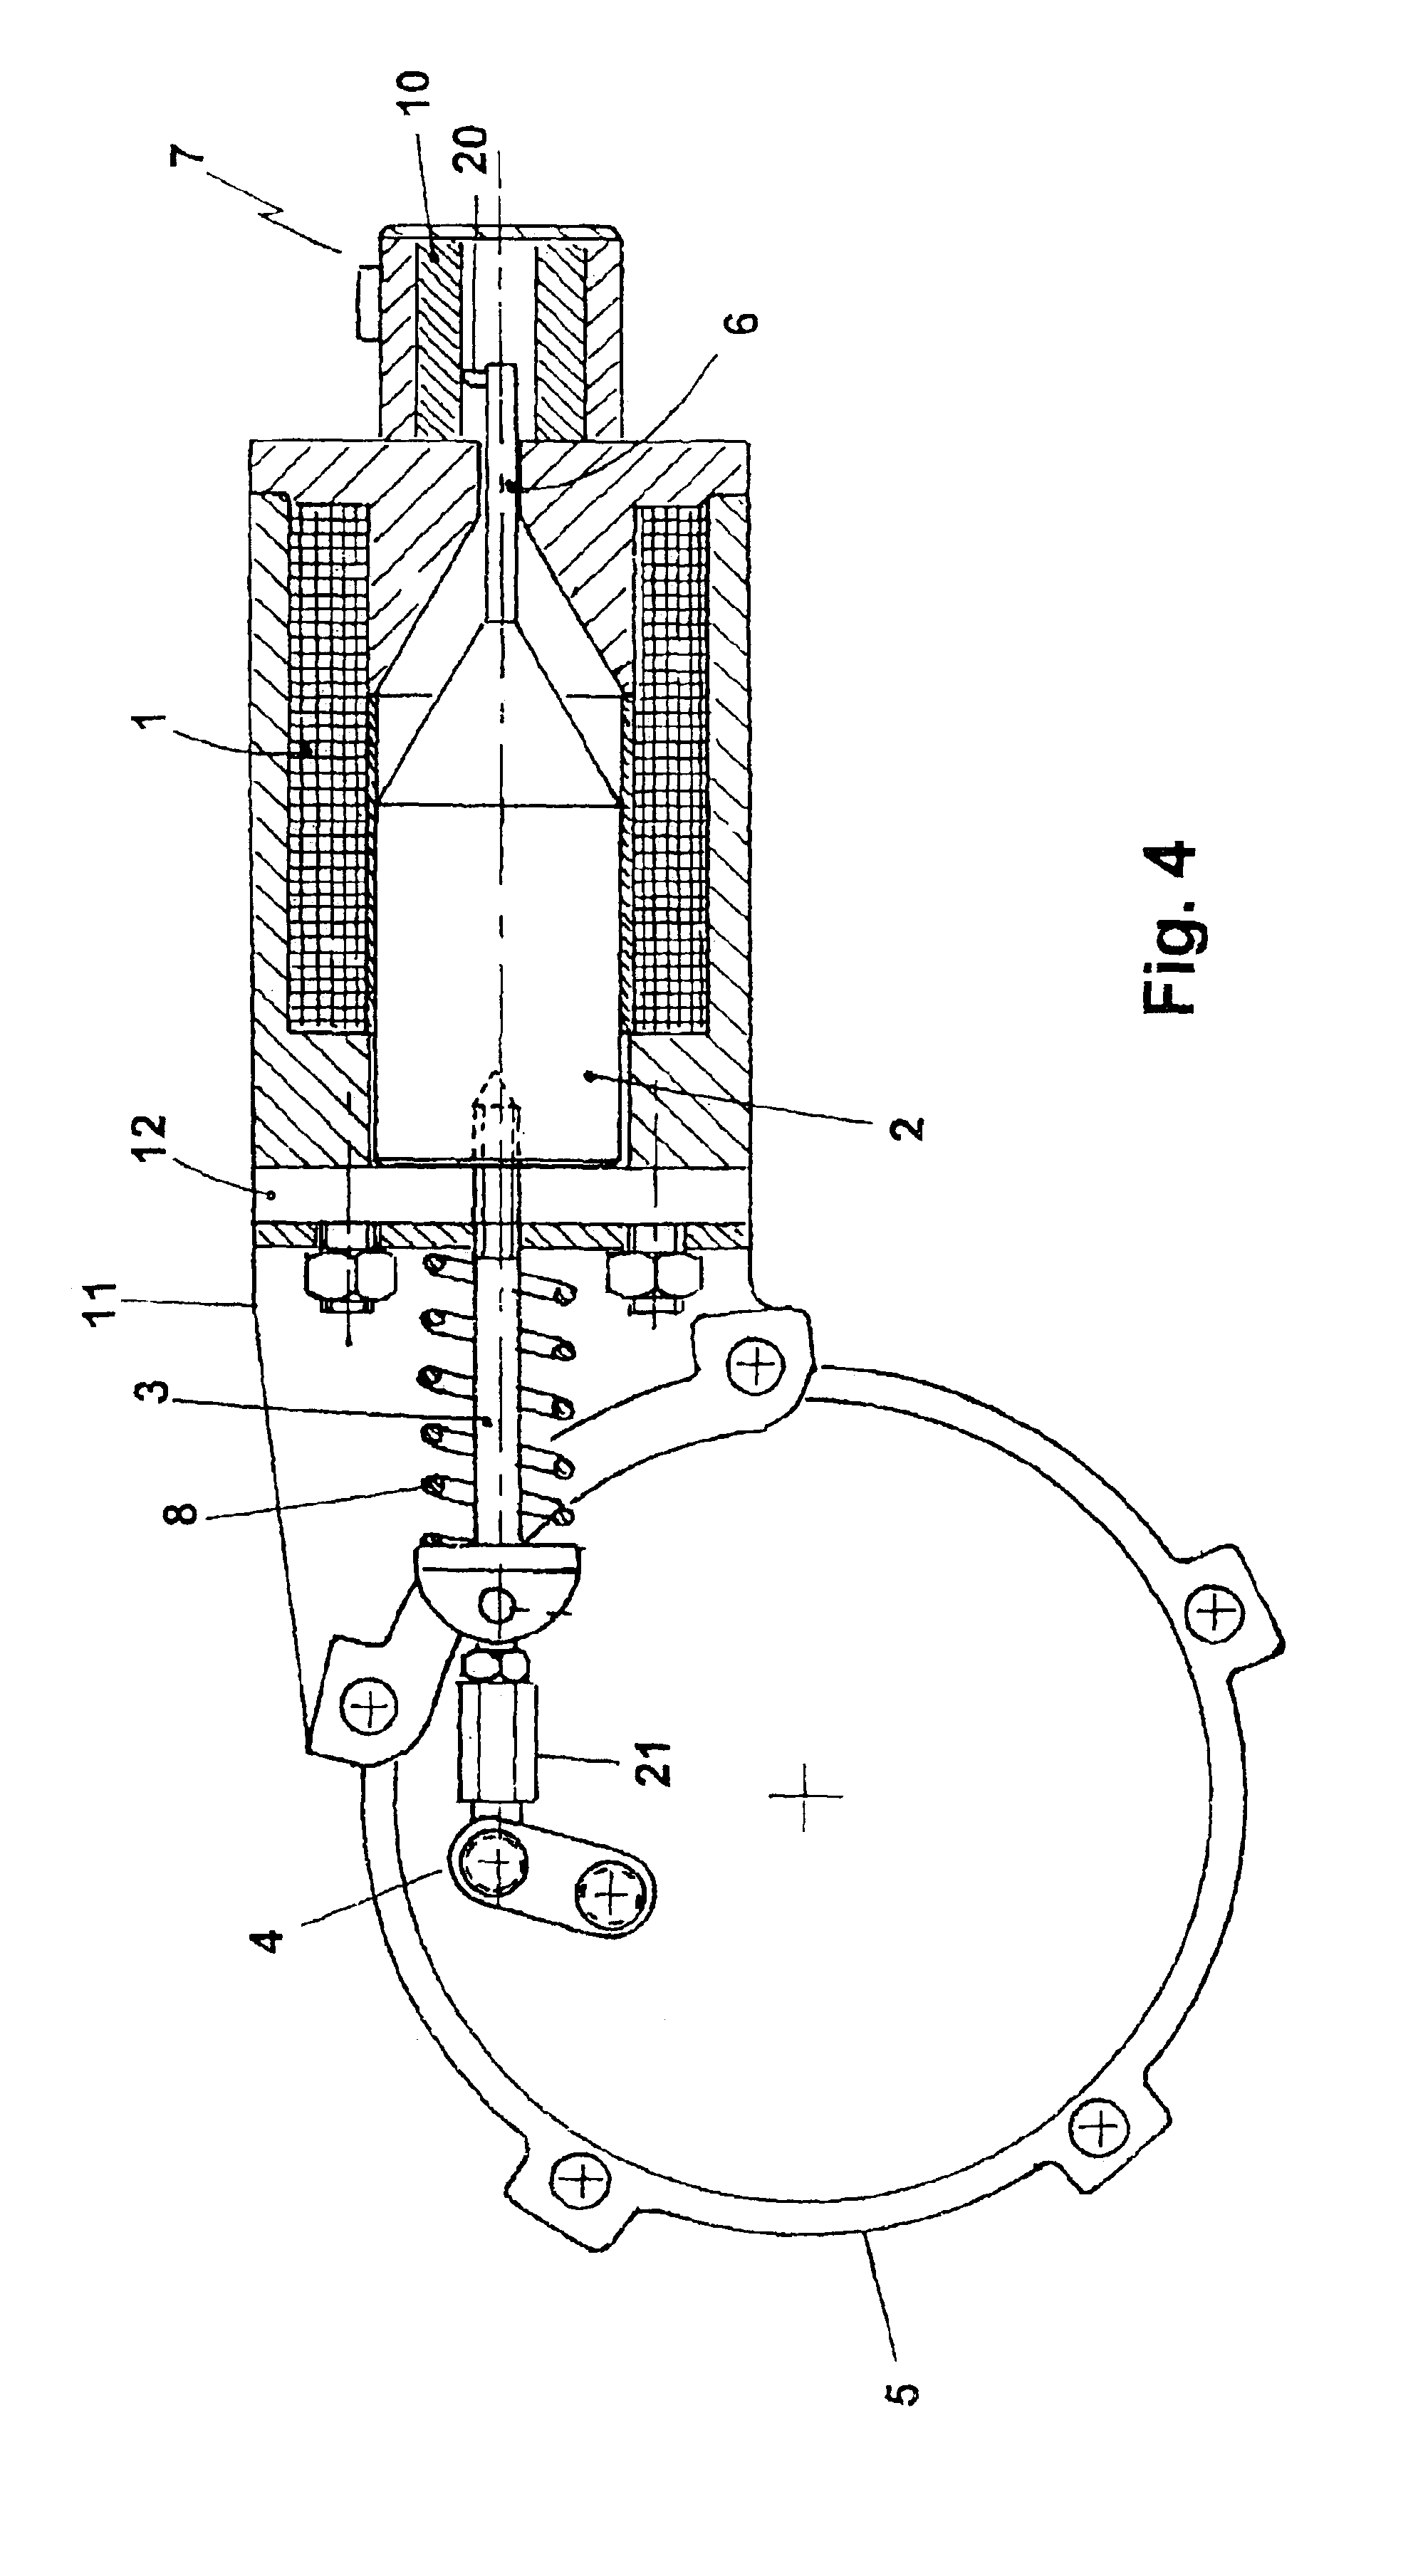 Electromechanical actuator for the regulation of the turbocharger of internal combustion engines